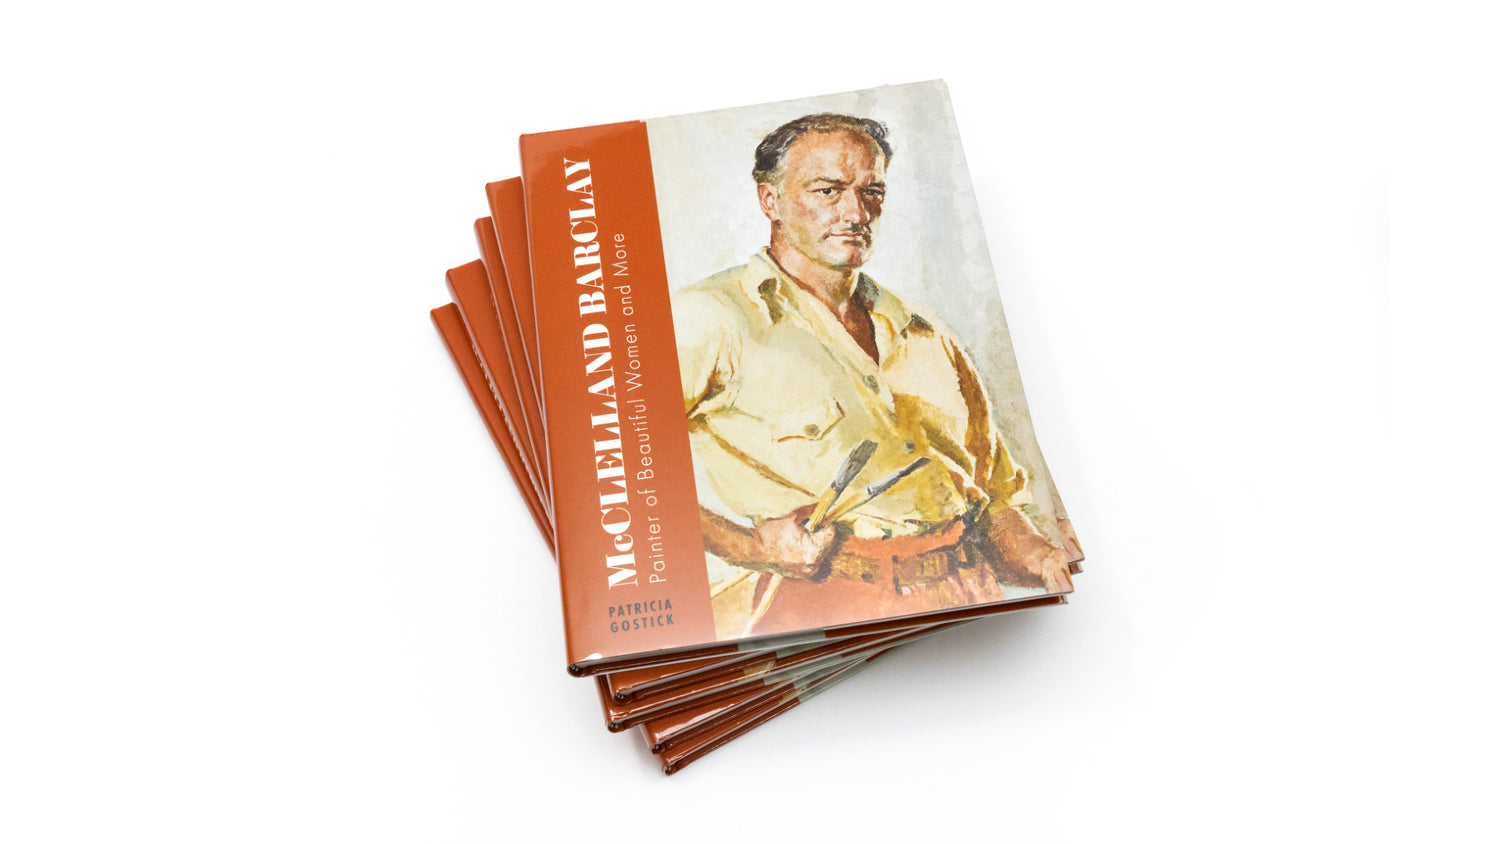 a stack of the new hardcover illustrated biography, "McClelland Barclay: Painter of Beautiful Women and More" by Patricia Gostick